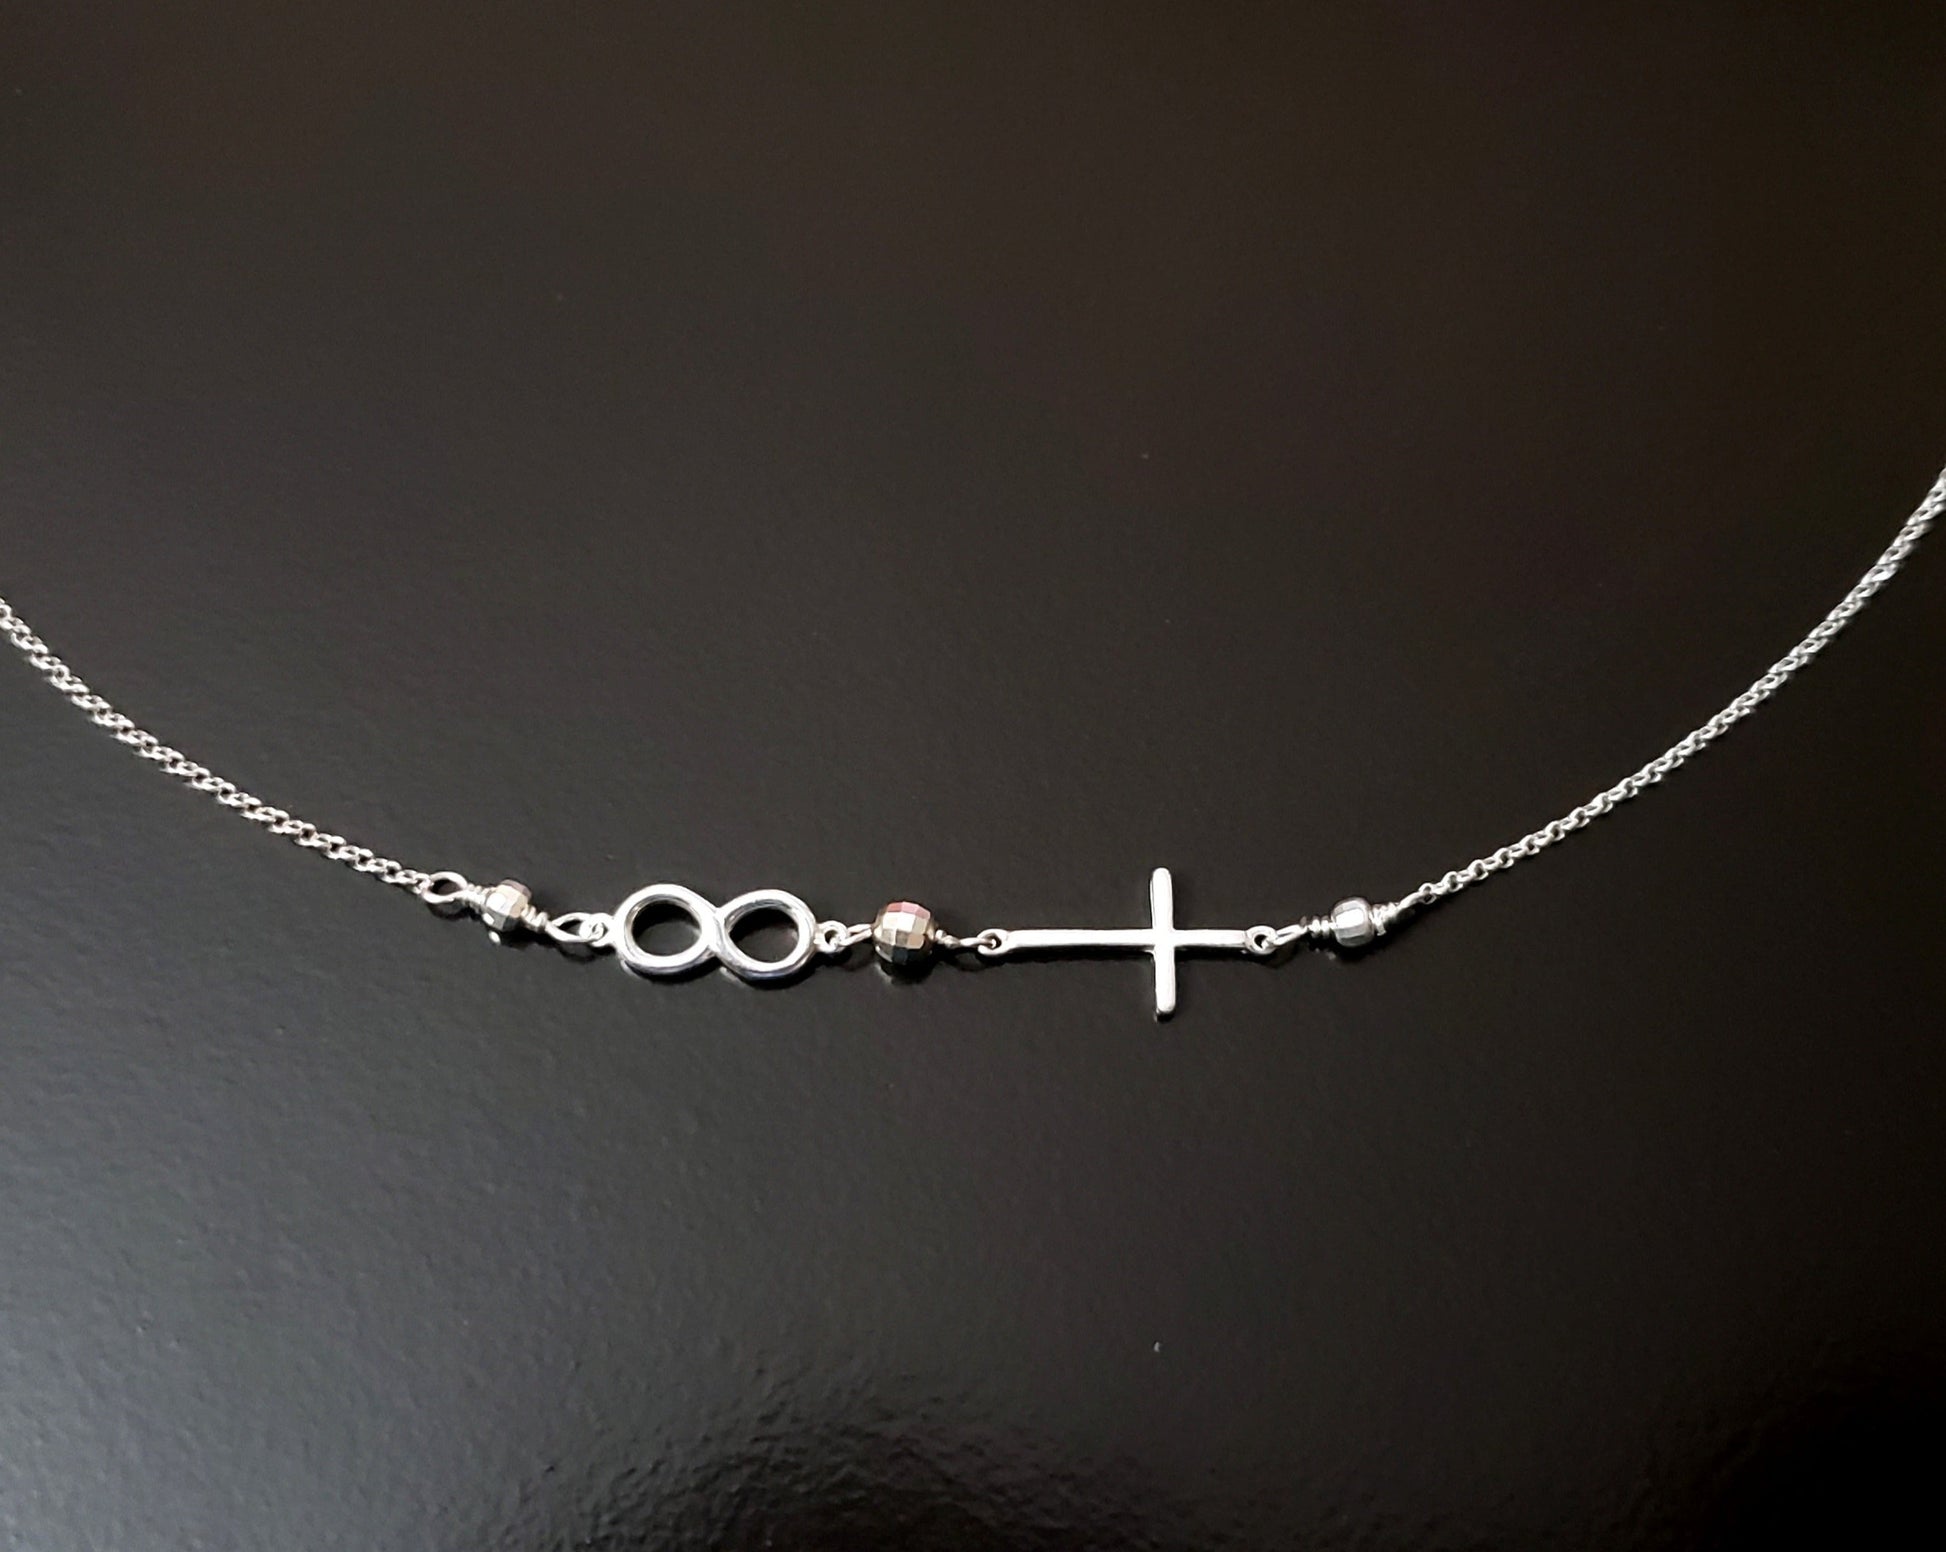 Infinite Faith Sideways Cross Infinity Necklace with an Infinity Pendant and Cross attached to chain with sparkly beads. 